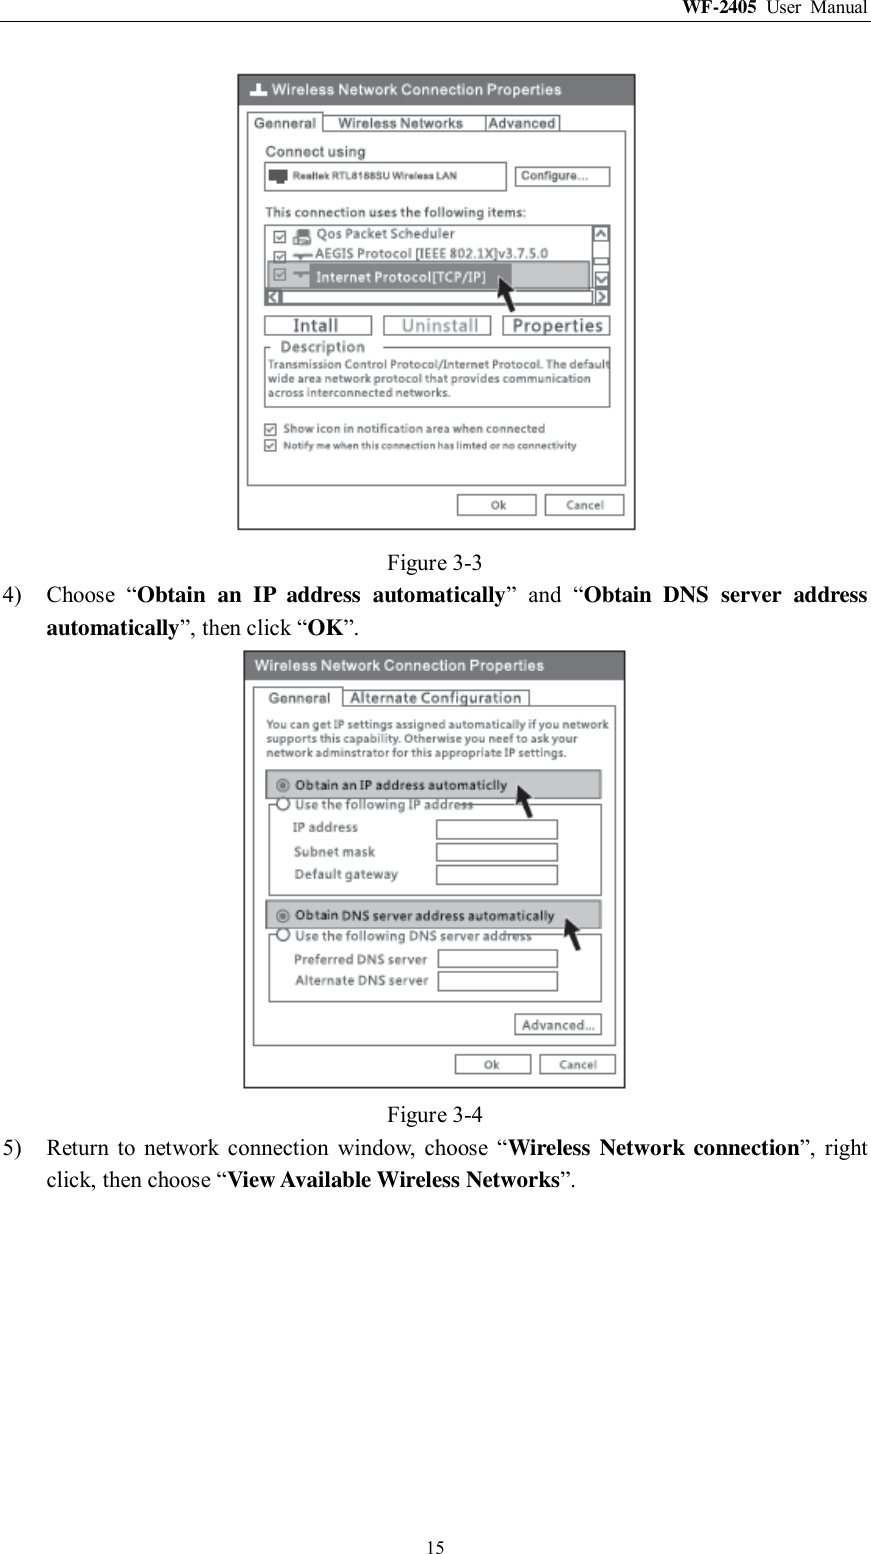 WF-2405  User  Manual  15  Figure 3-3 4) Choose  “Obtain  an  IP  address  automatically”  and  “Obtain  DNS  server  address automatically”, then click “OK”.  Figure 3-4 5) Return  to  network  connection  window,  choose  “Wireless Network connection”,  right click, then choose “View Available Wireless Networks”. 